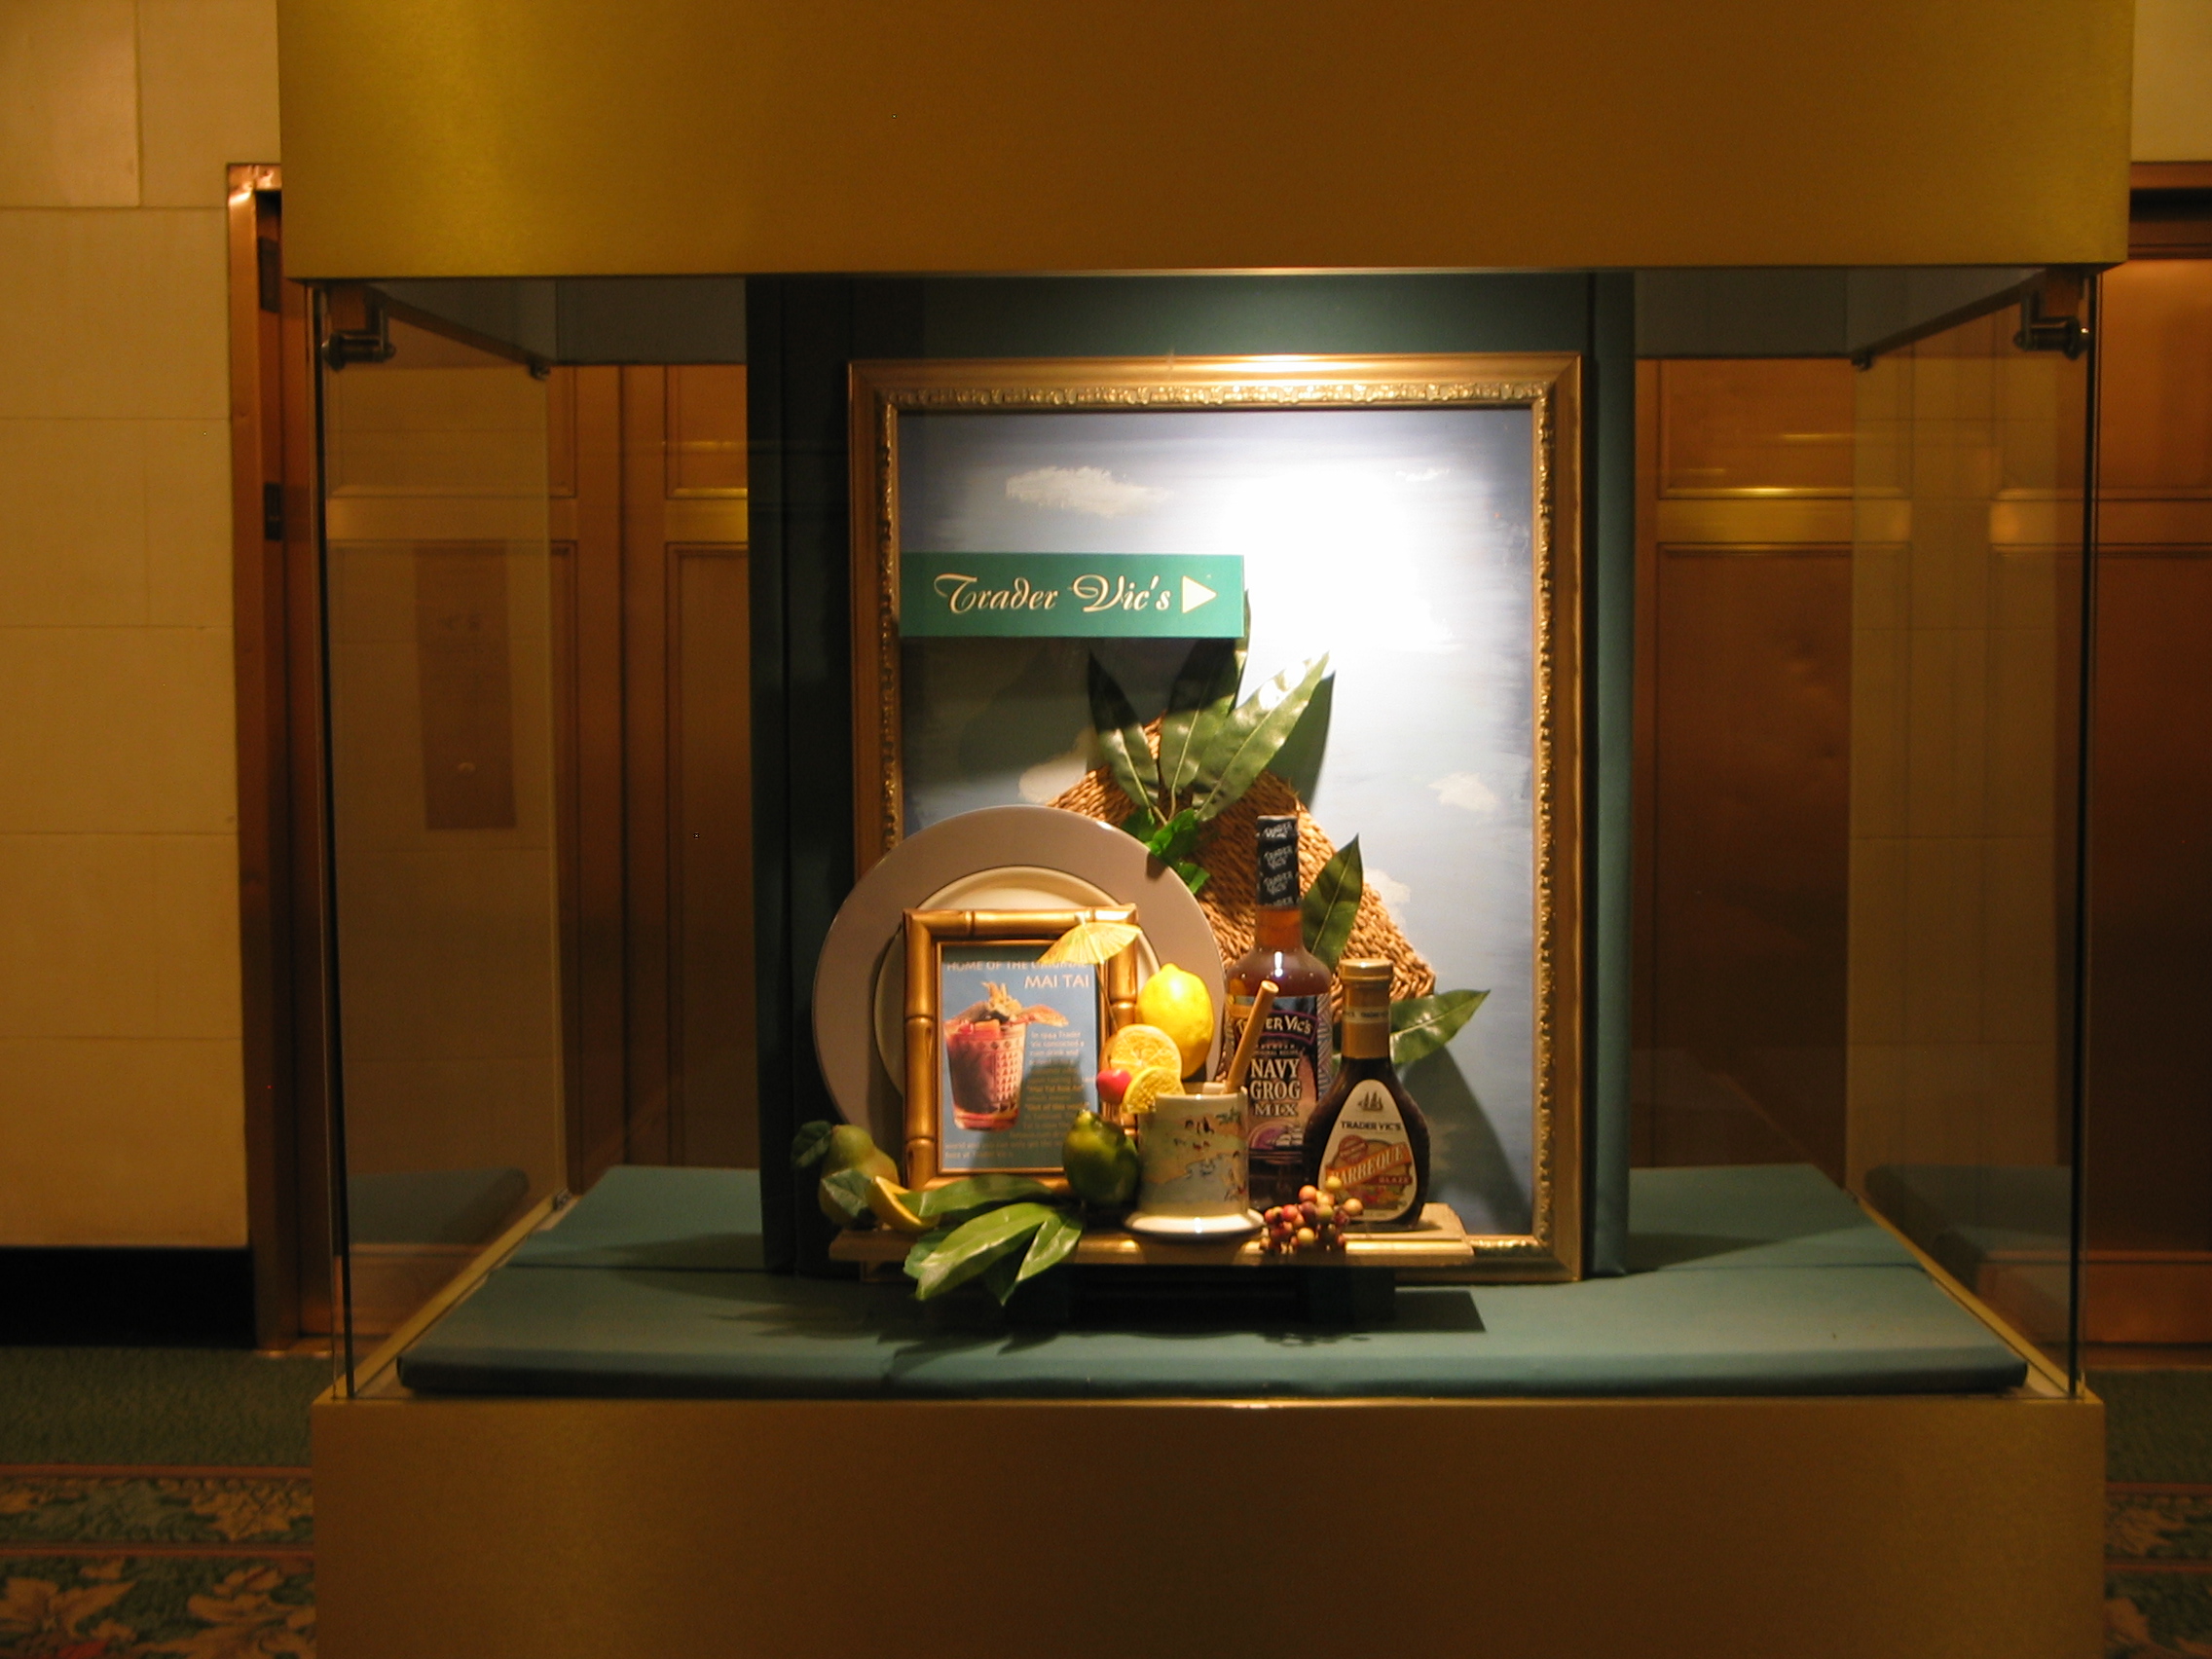 As you come down the elevator from the hotel, you see this glass case enticing you with tropical treats.